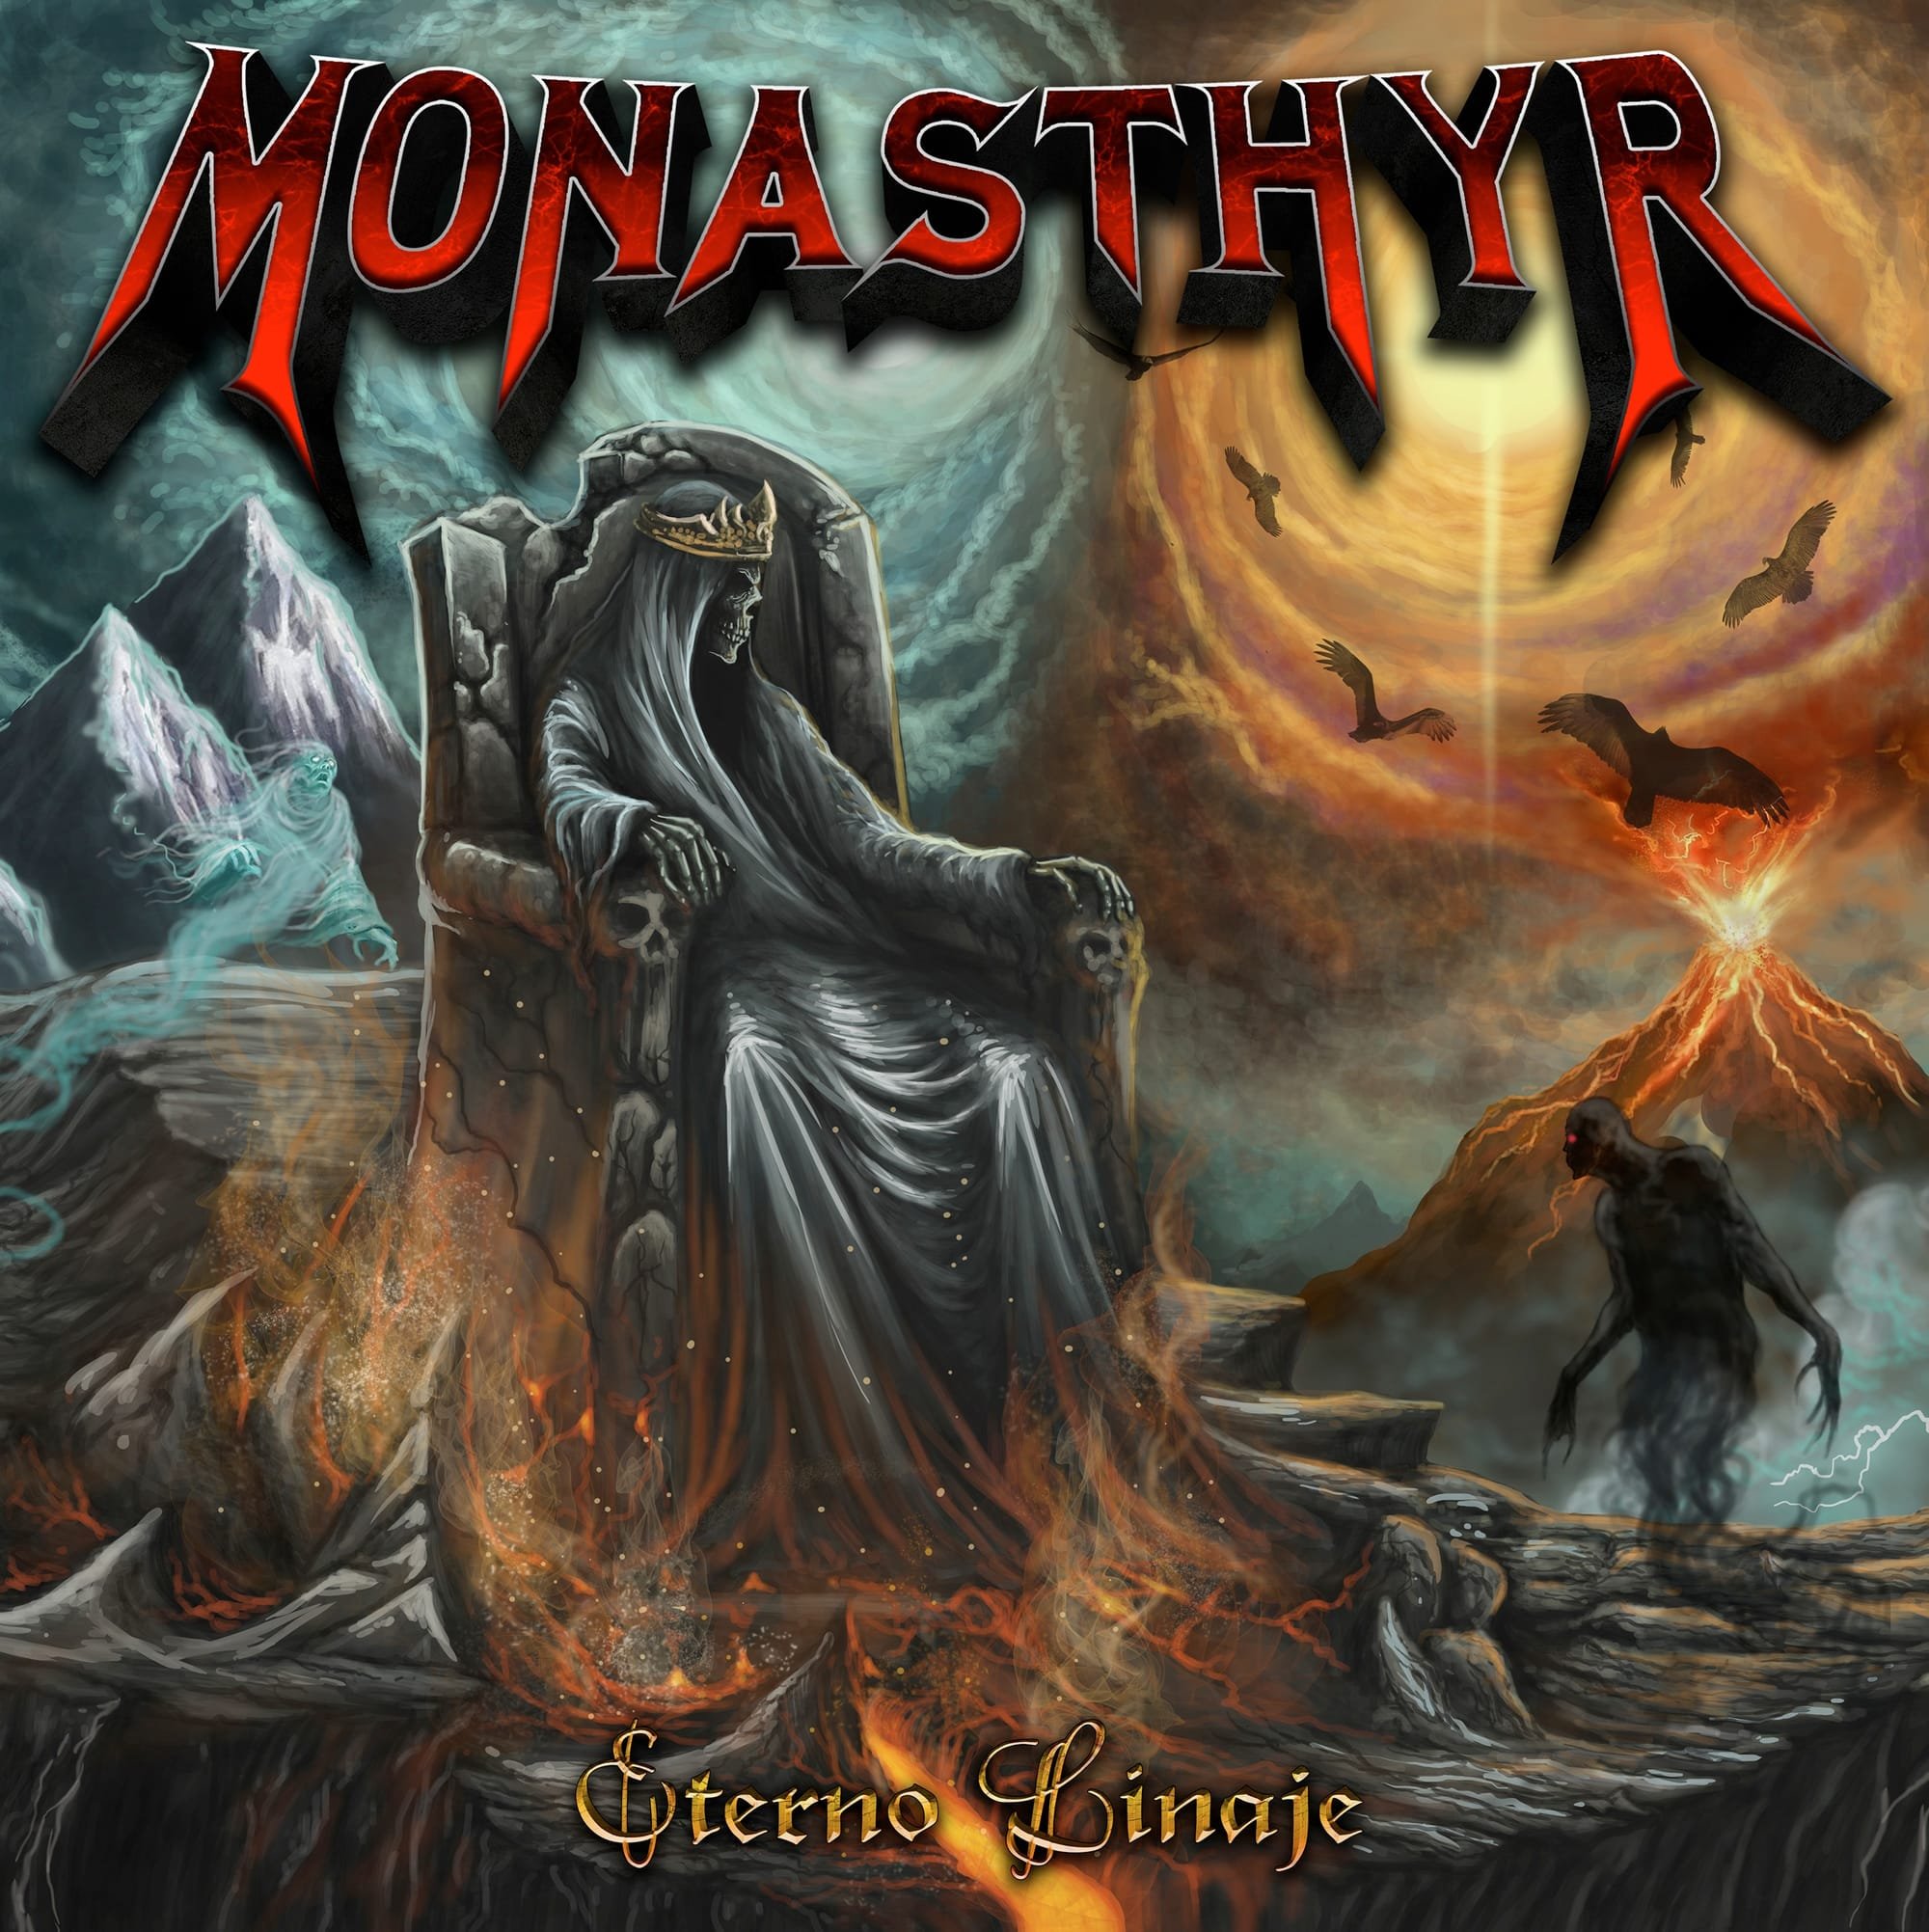 Interview with MONASTHYR